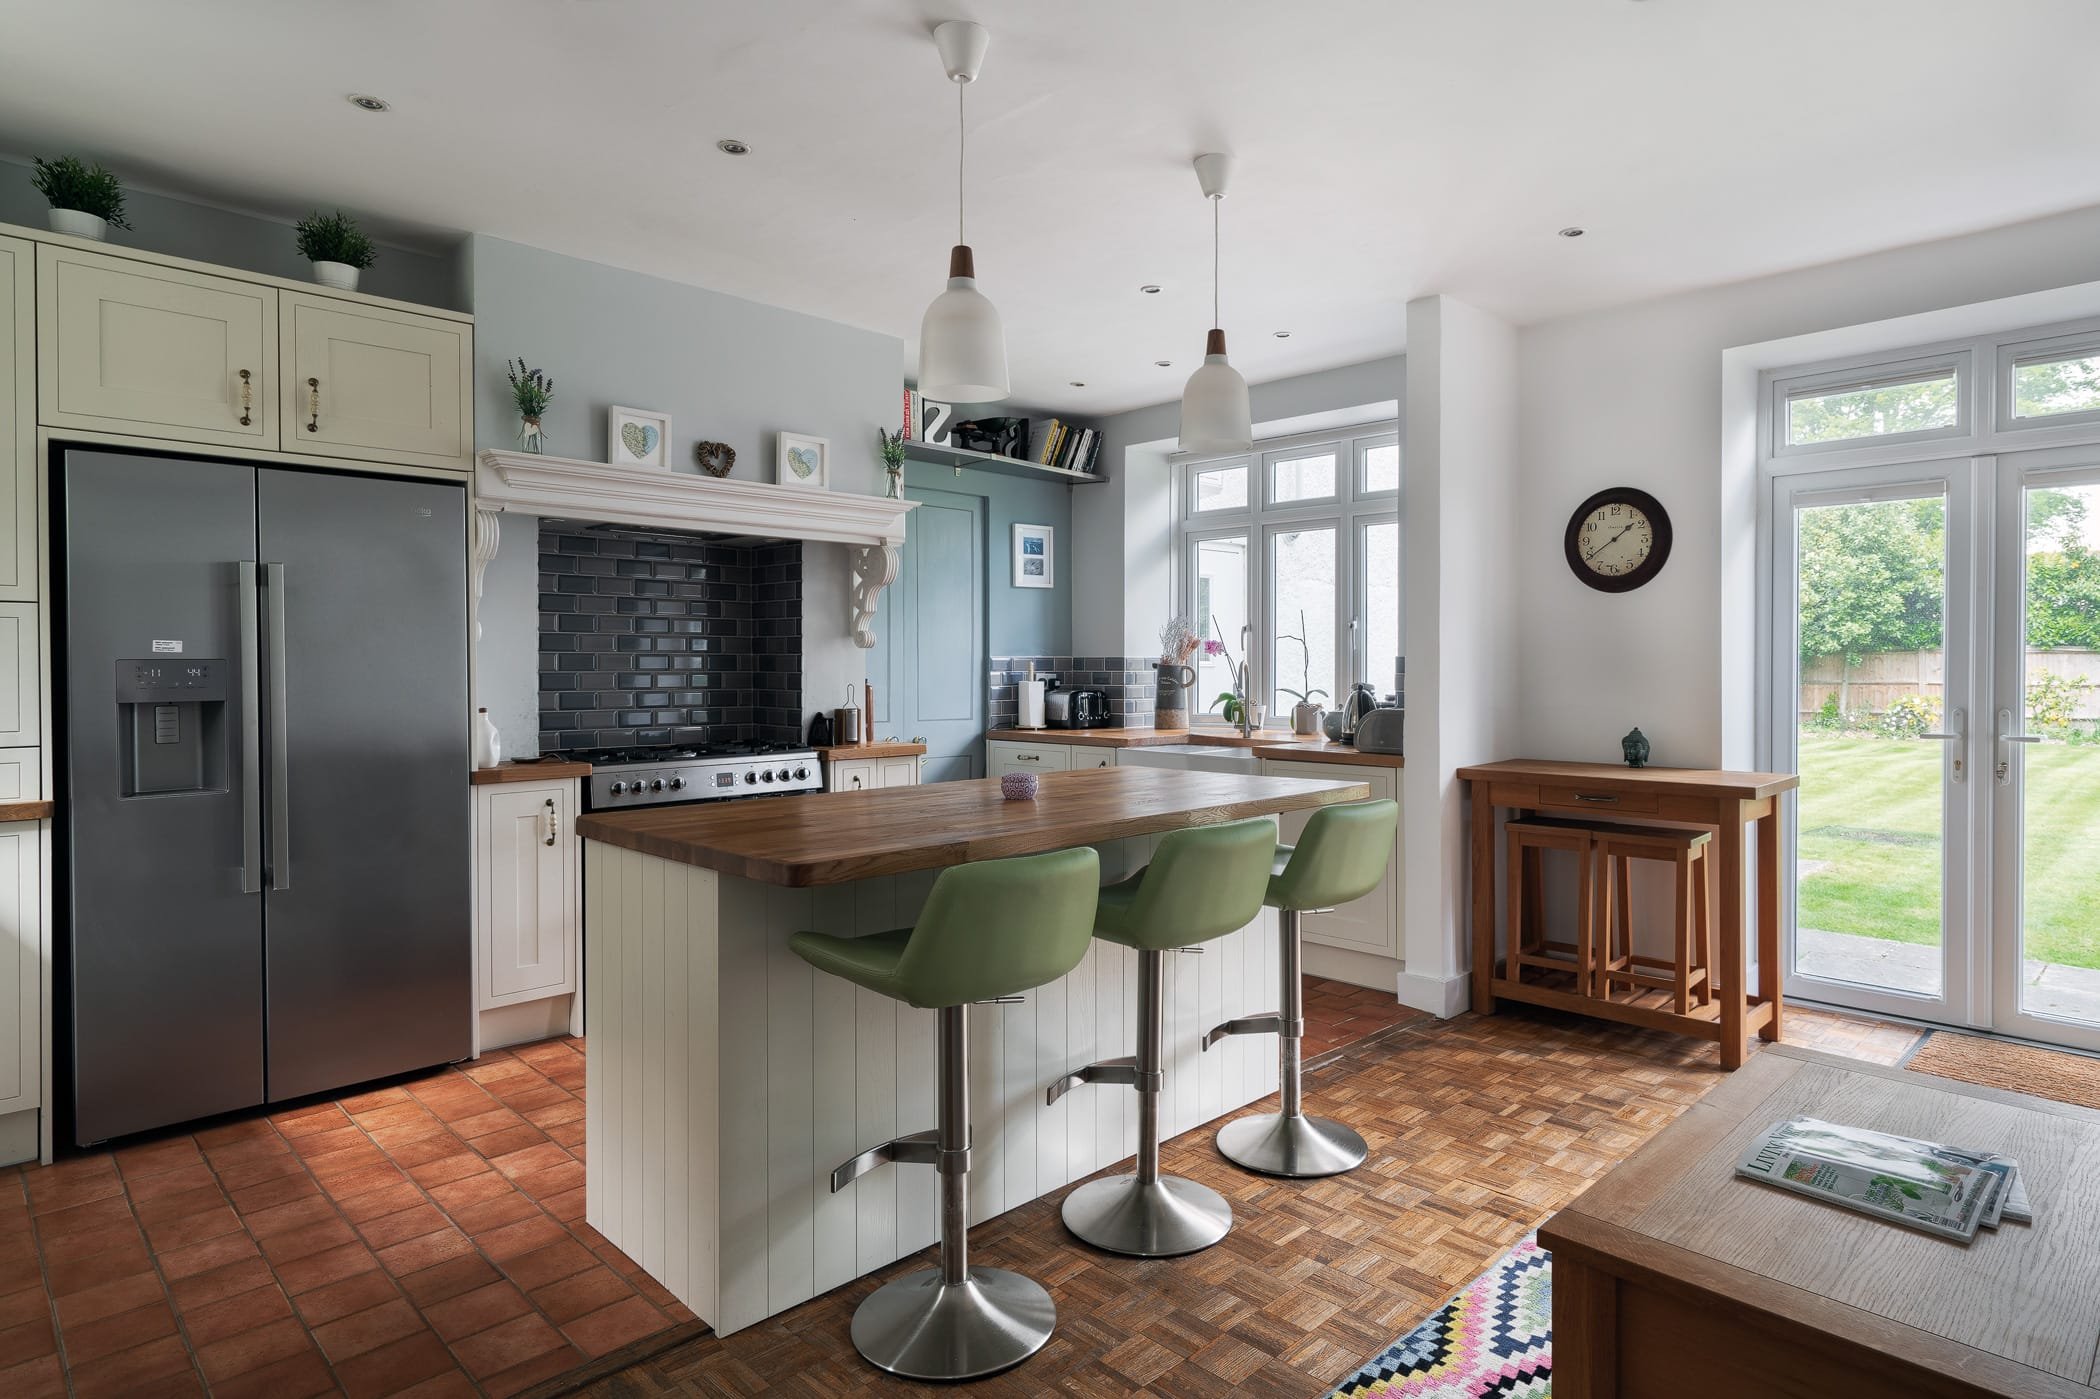 Newbury photography, Interior shot of a kitchen in an Airbnb rental 